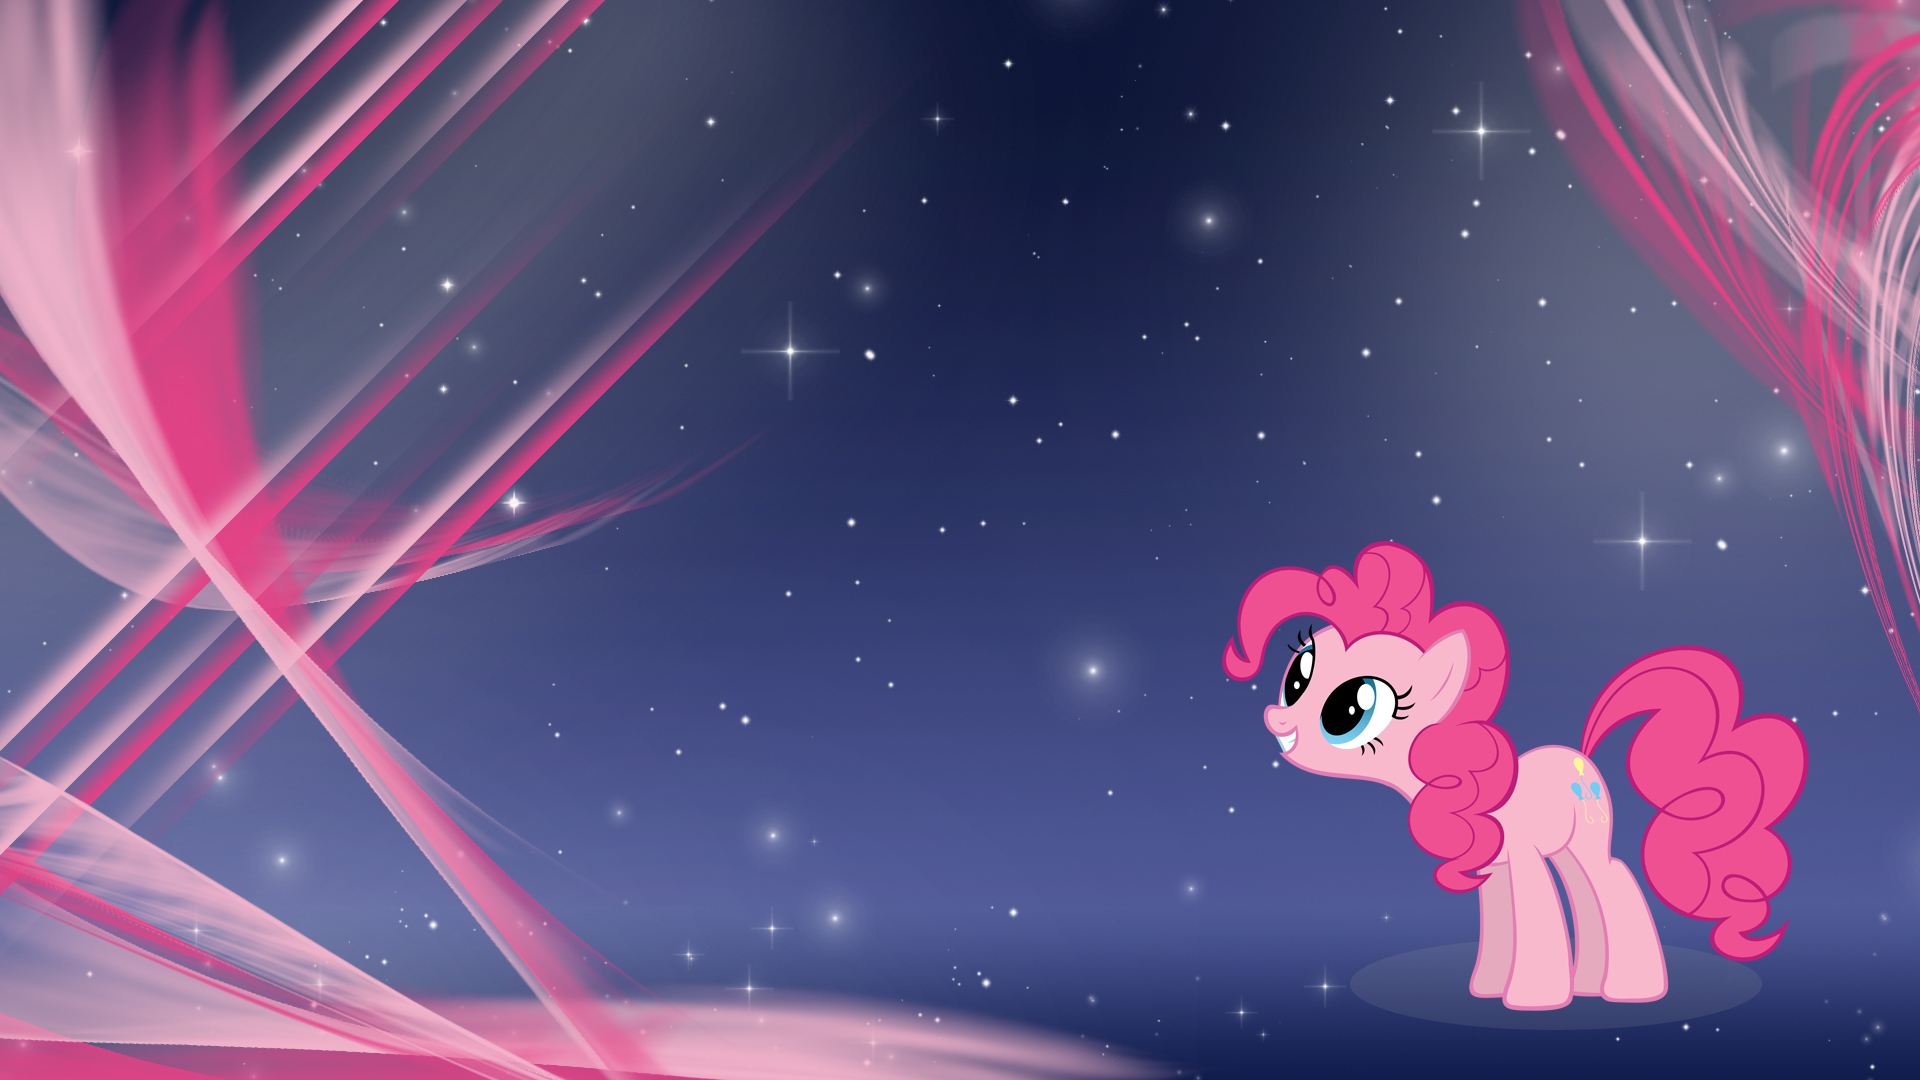 MLP: FiM - Pinkie Pie V2 by datNaro and Unfiltered-N